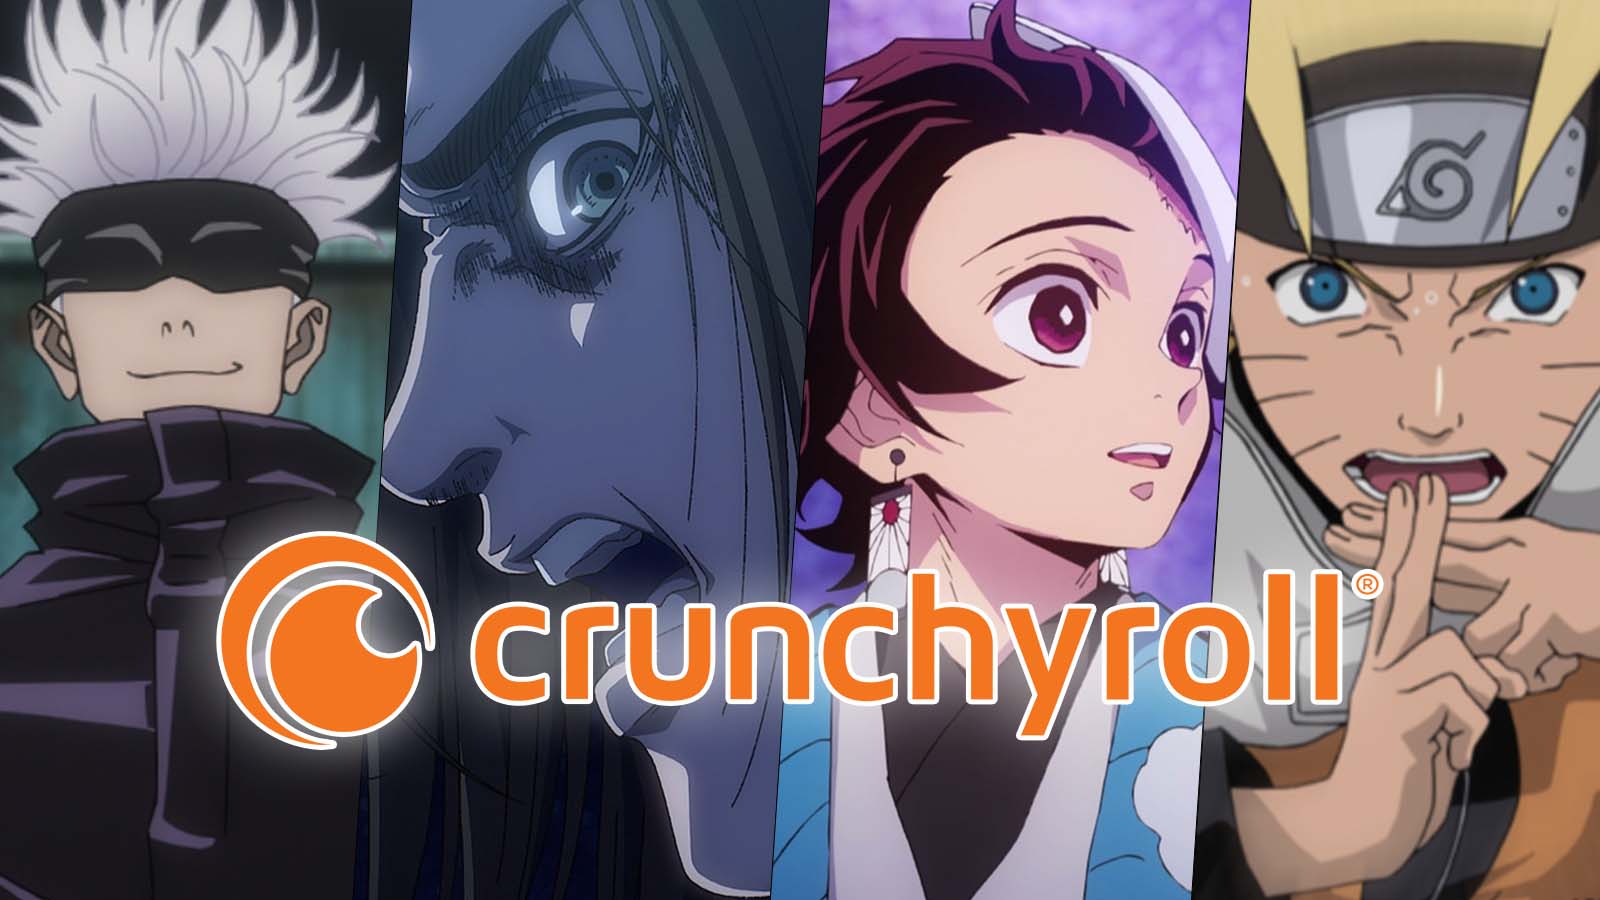 Funimation’s YouTube Channel To Rebrand As Crunchyroll Dubs